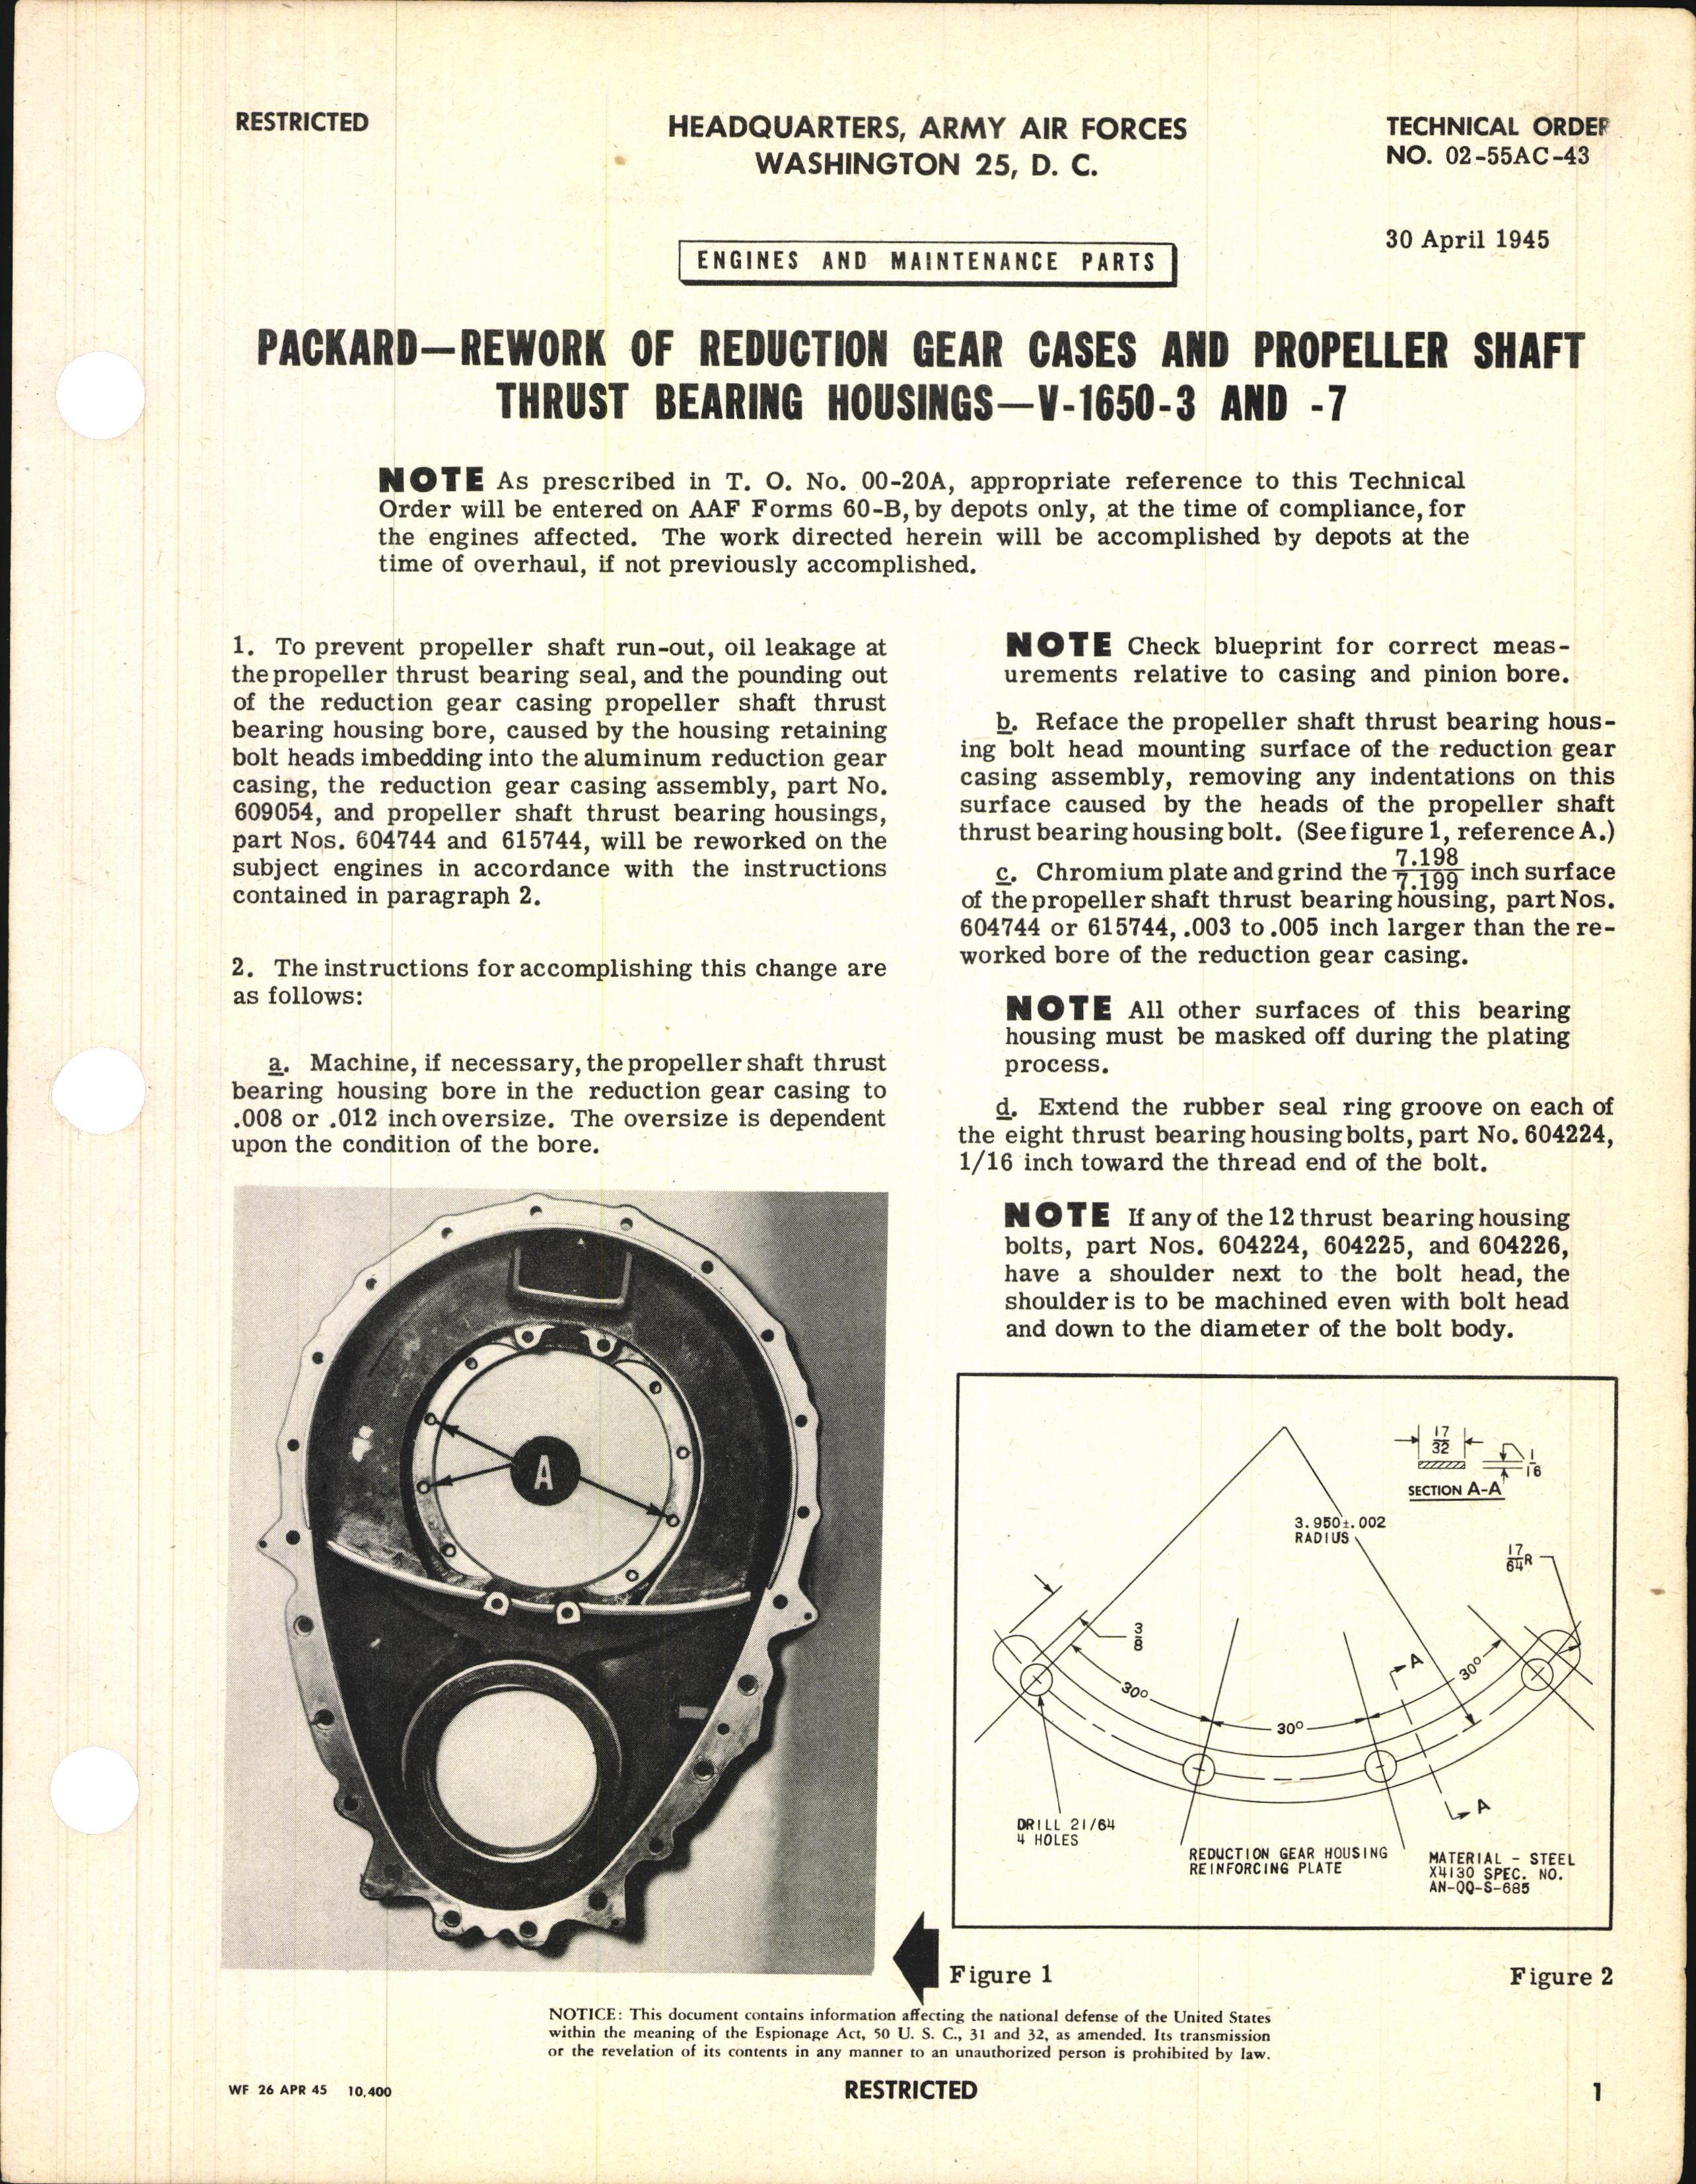 Sample page 1 from AirCorps Library document: Rework of Reduction Gear Cases and Propeller Shaft Thrust Bearing Housings for V-1650-3 and -7